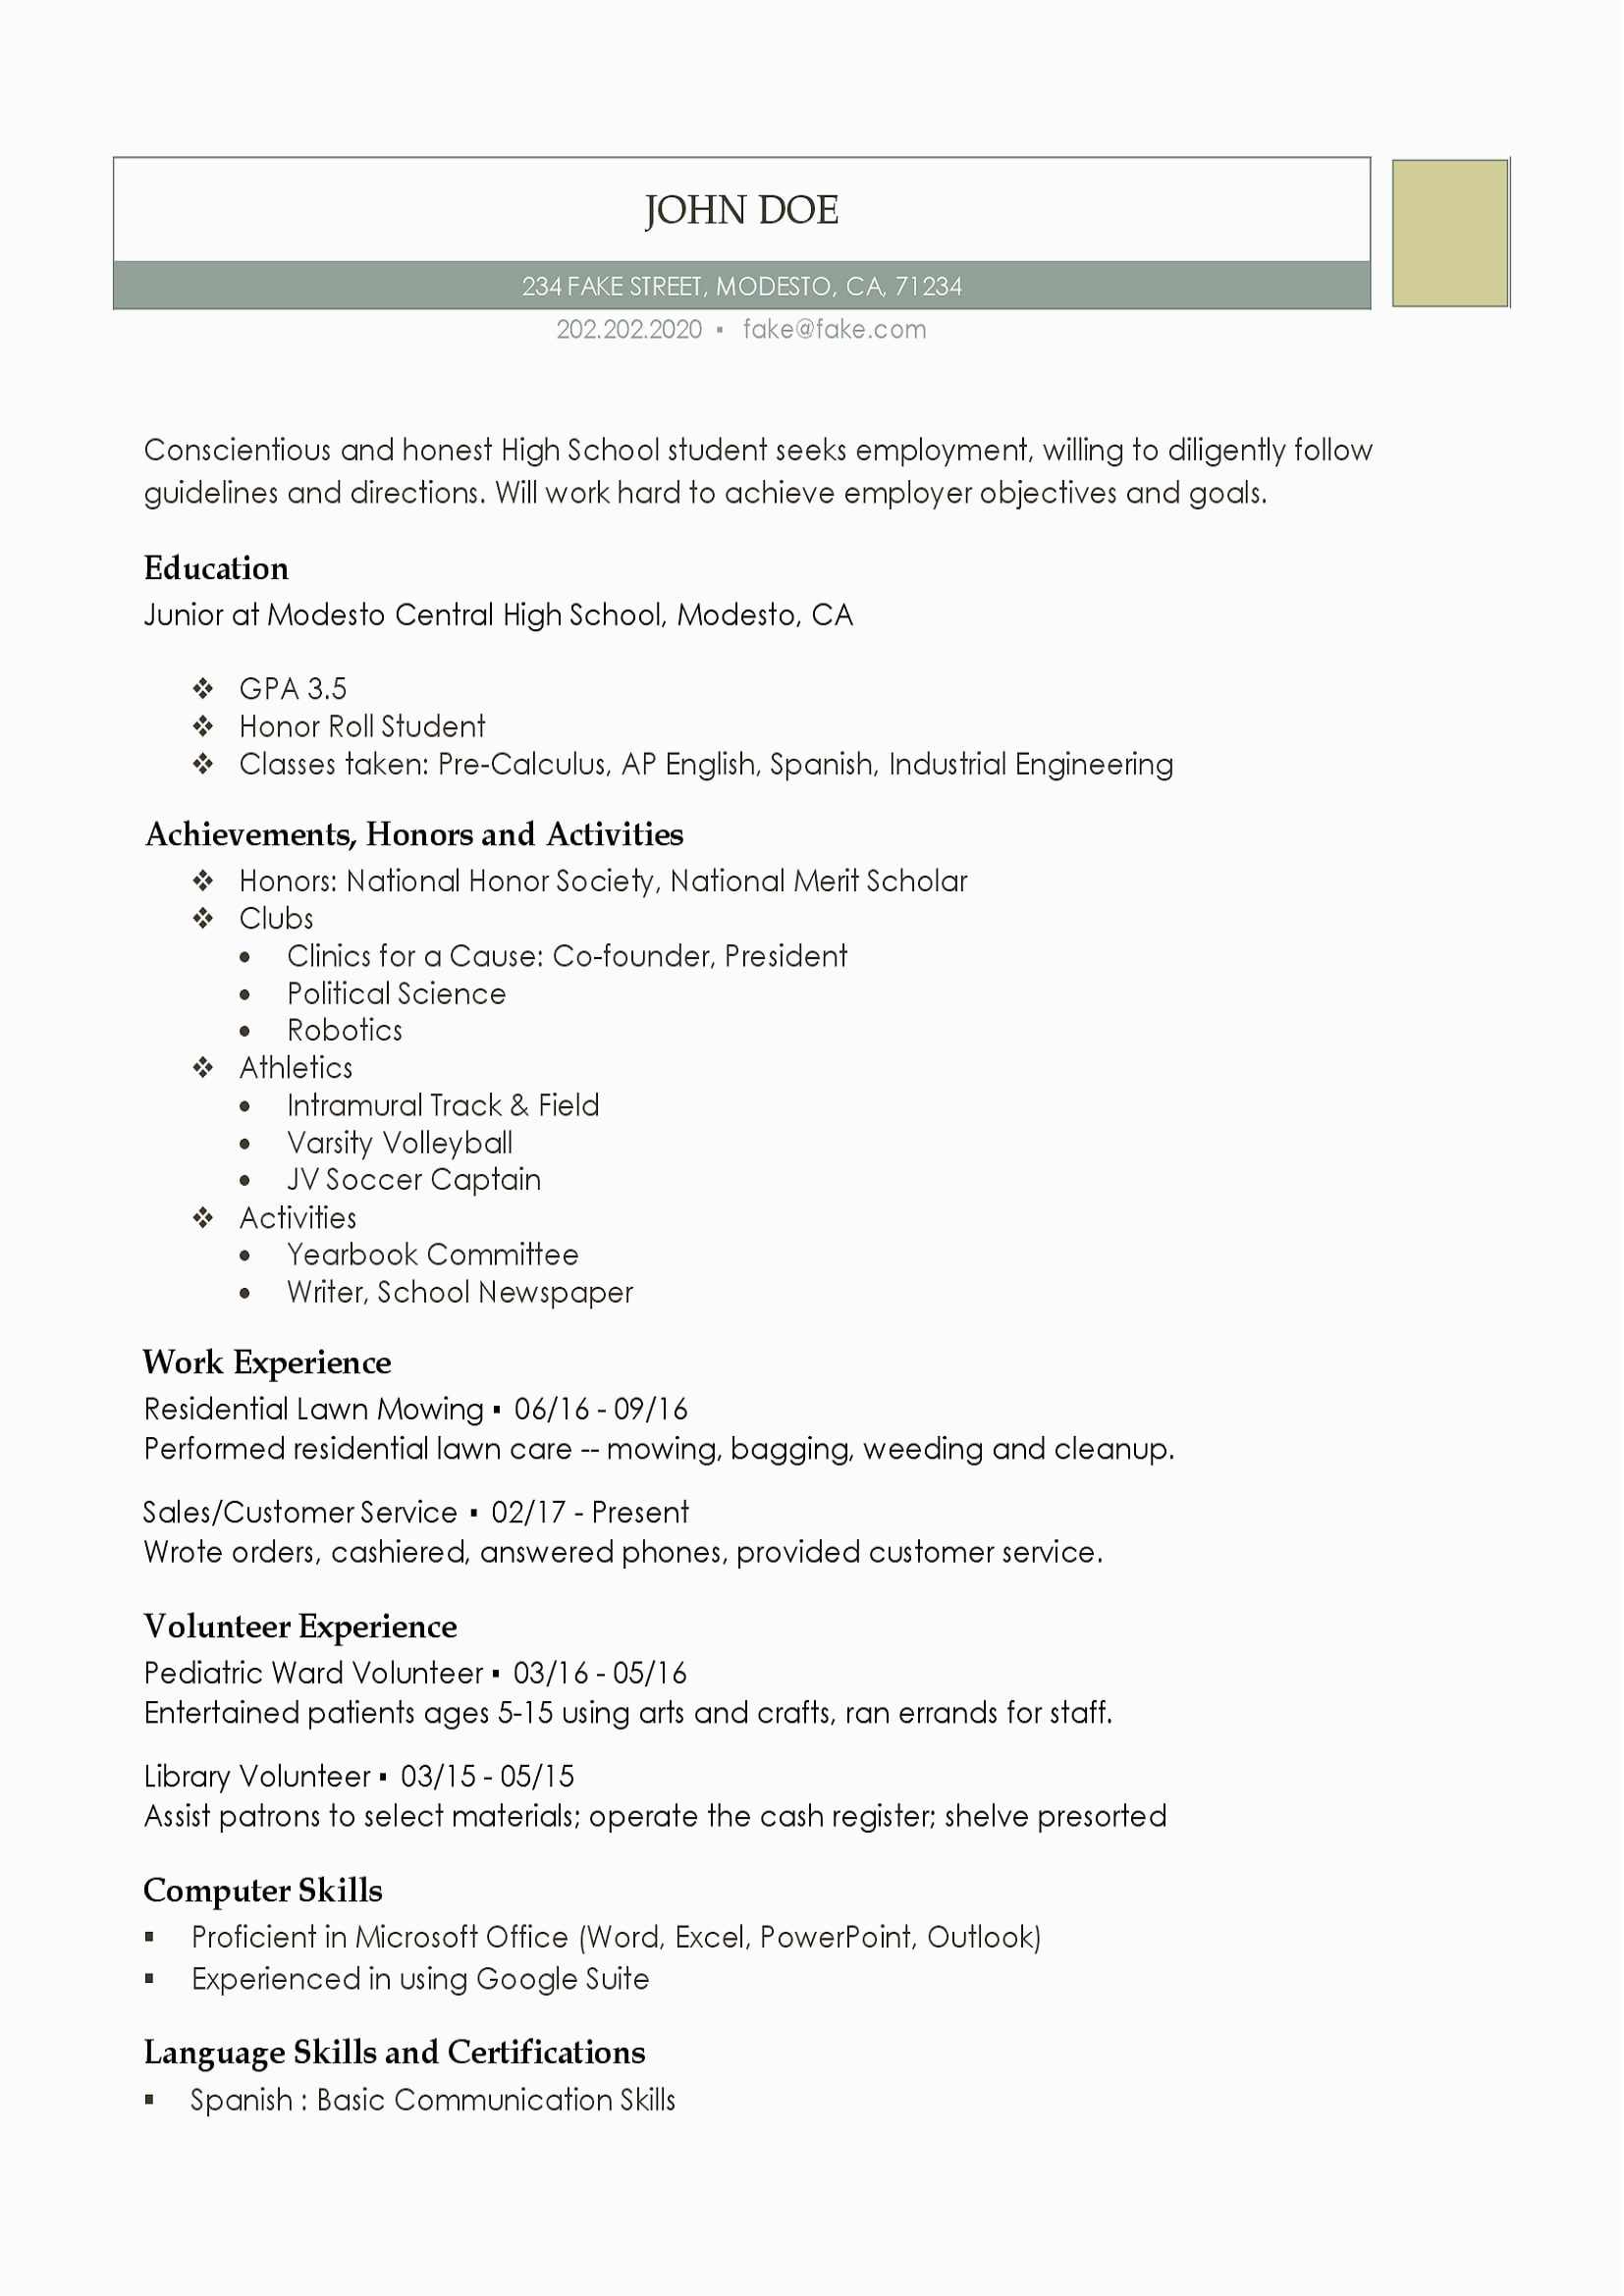 Resume for A High School Student Template High School Resume Resume Templates for High School